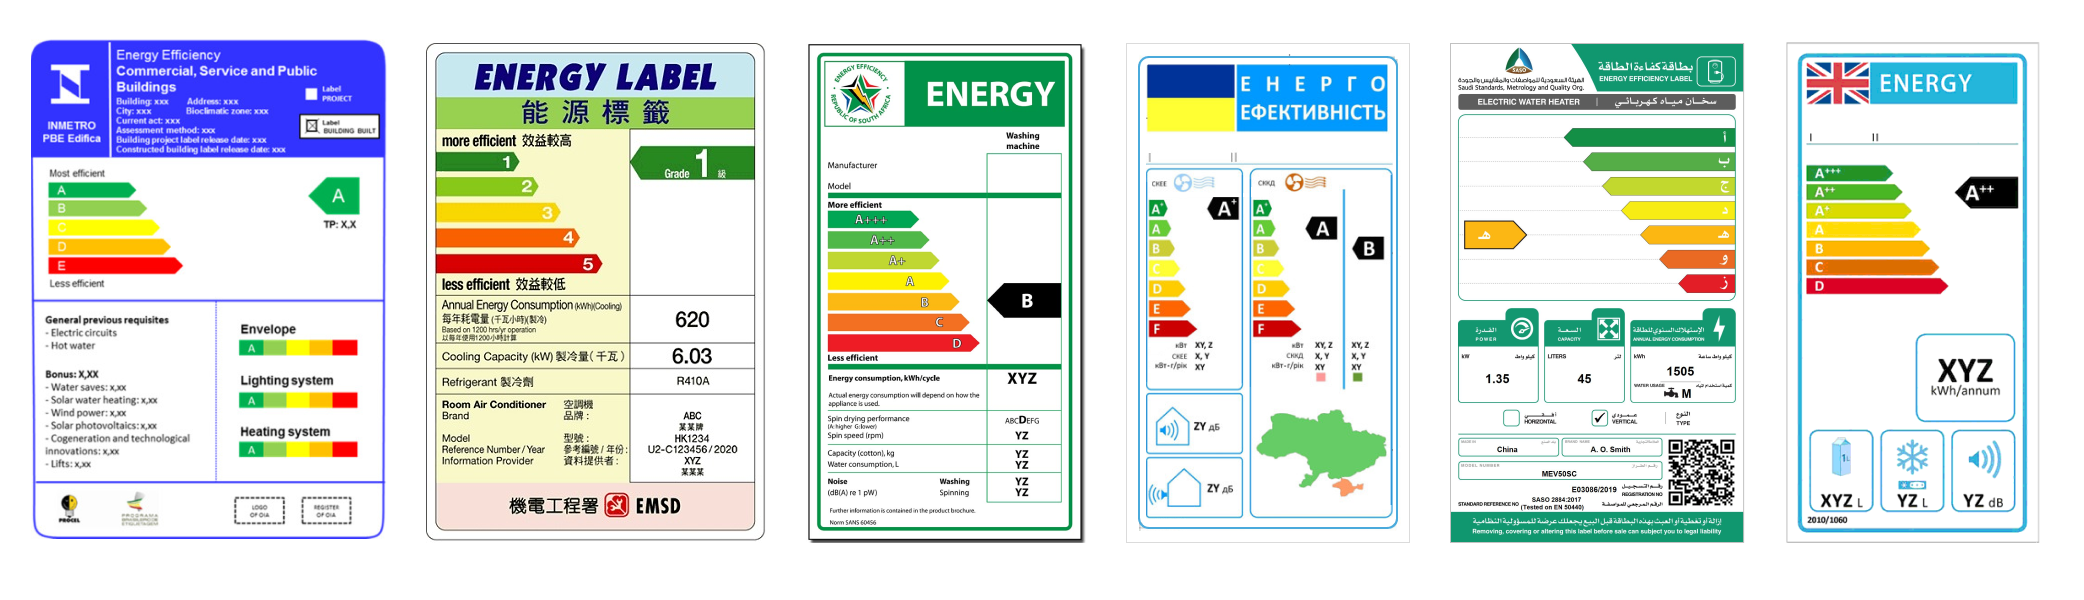 energy labels from different countries